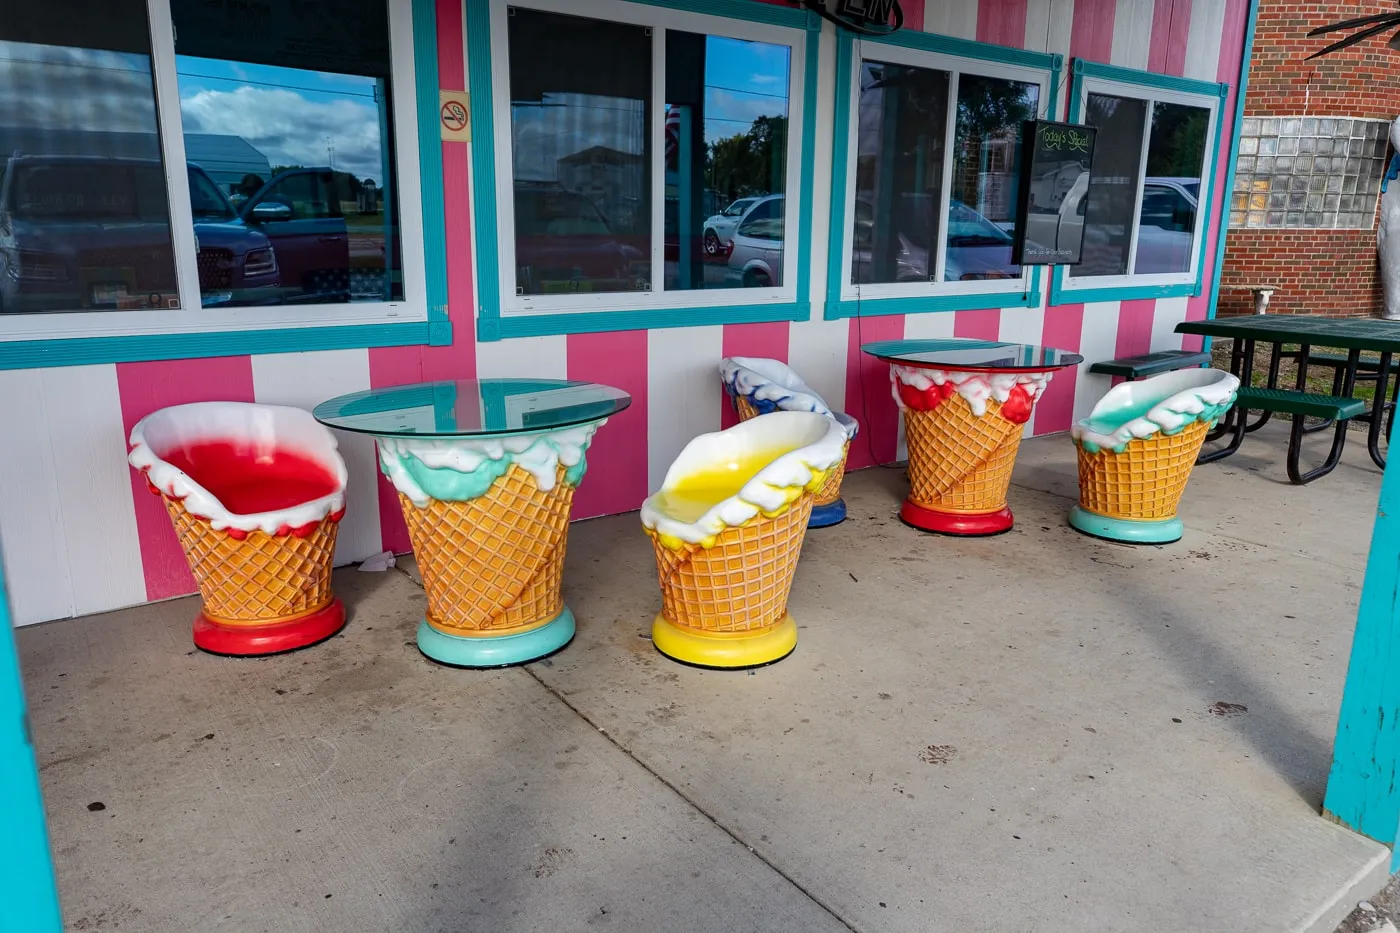 Ice cream chairs at the Pink Elephant Antique Mall in Livingston, Illinois - Route 66 Roadside Attraction